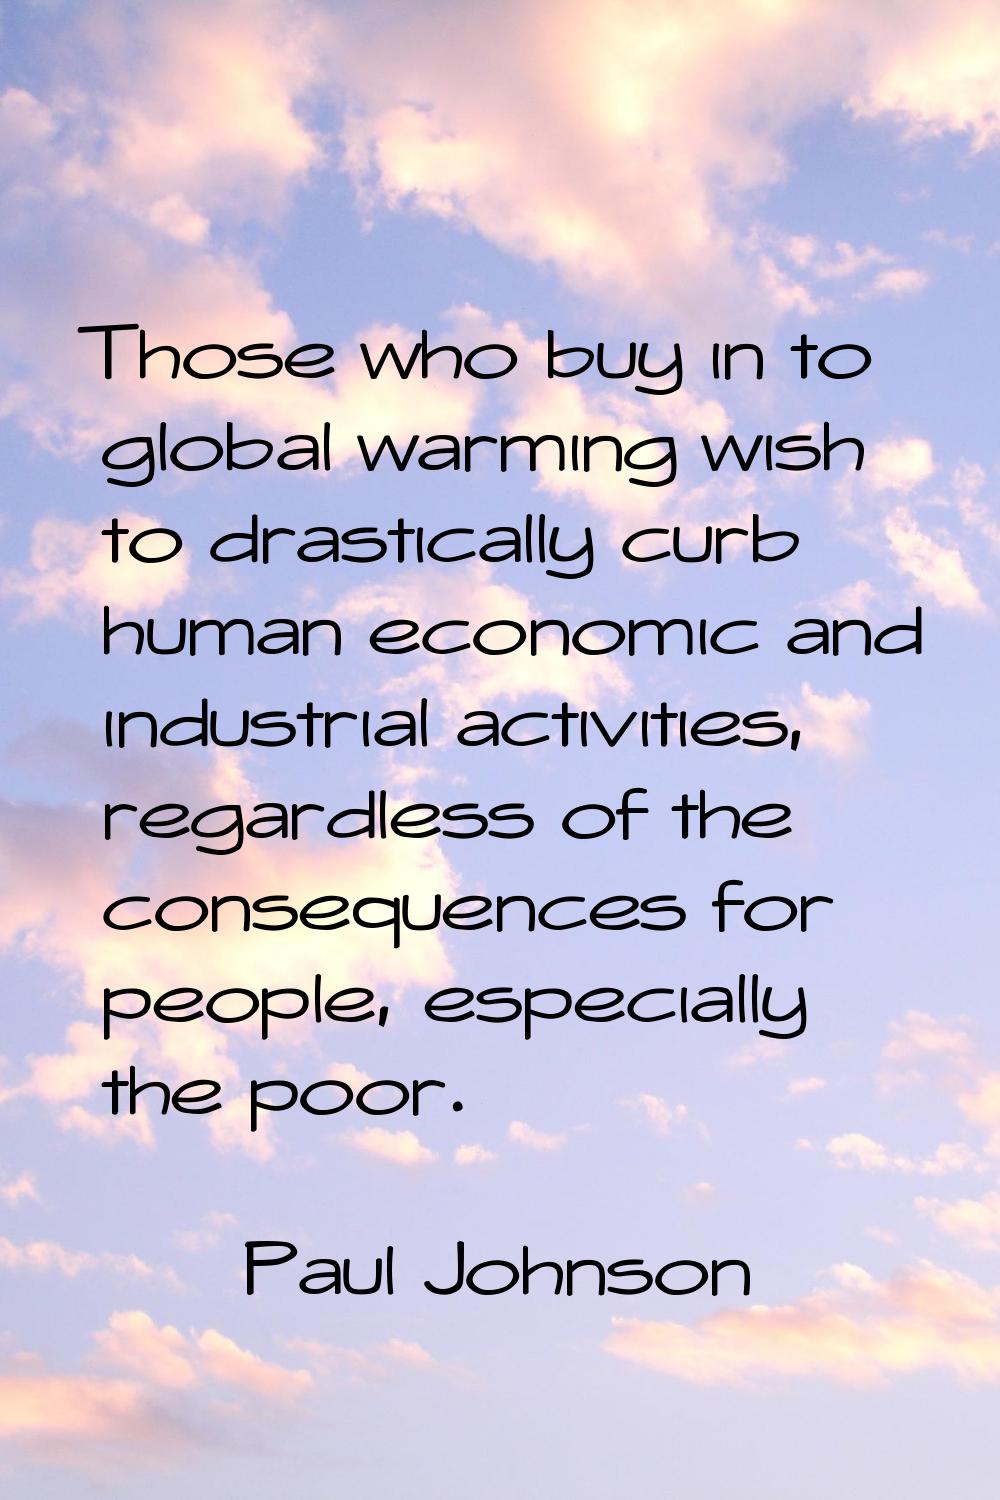 Those who buy in to global warming wish to drastically curb human economic and industrial activitie